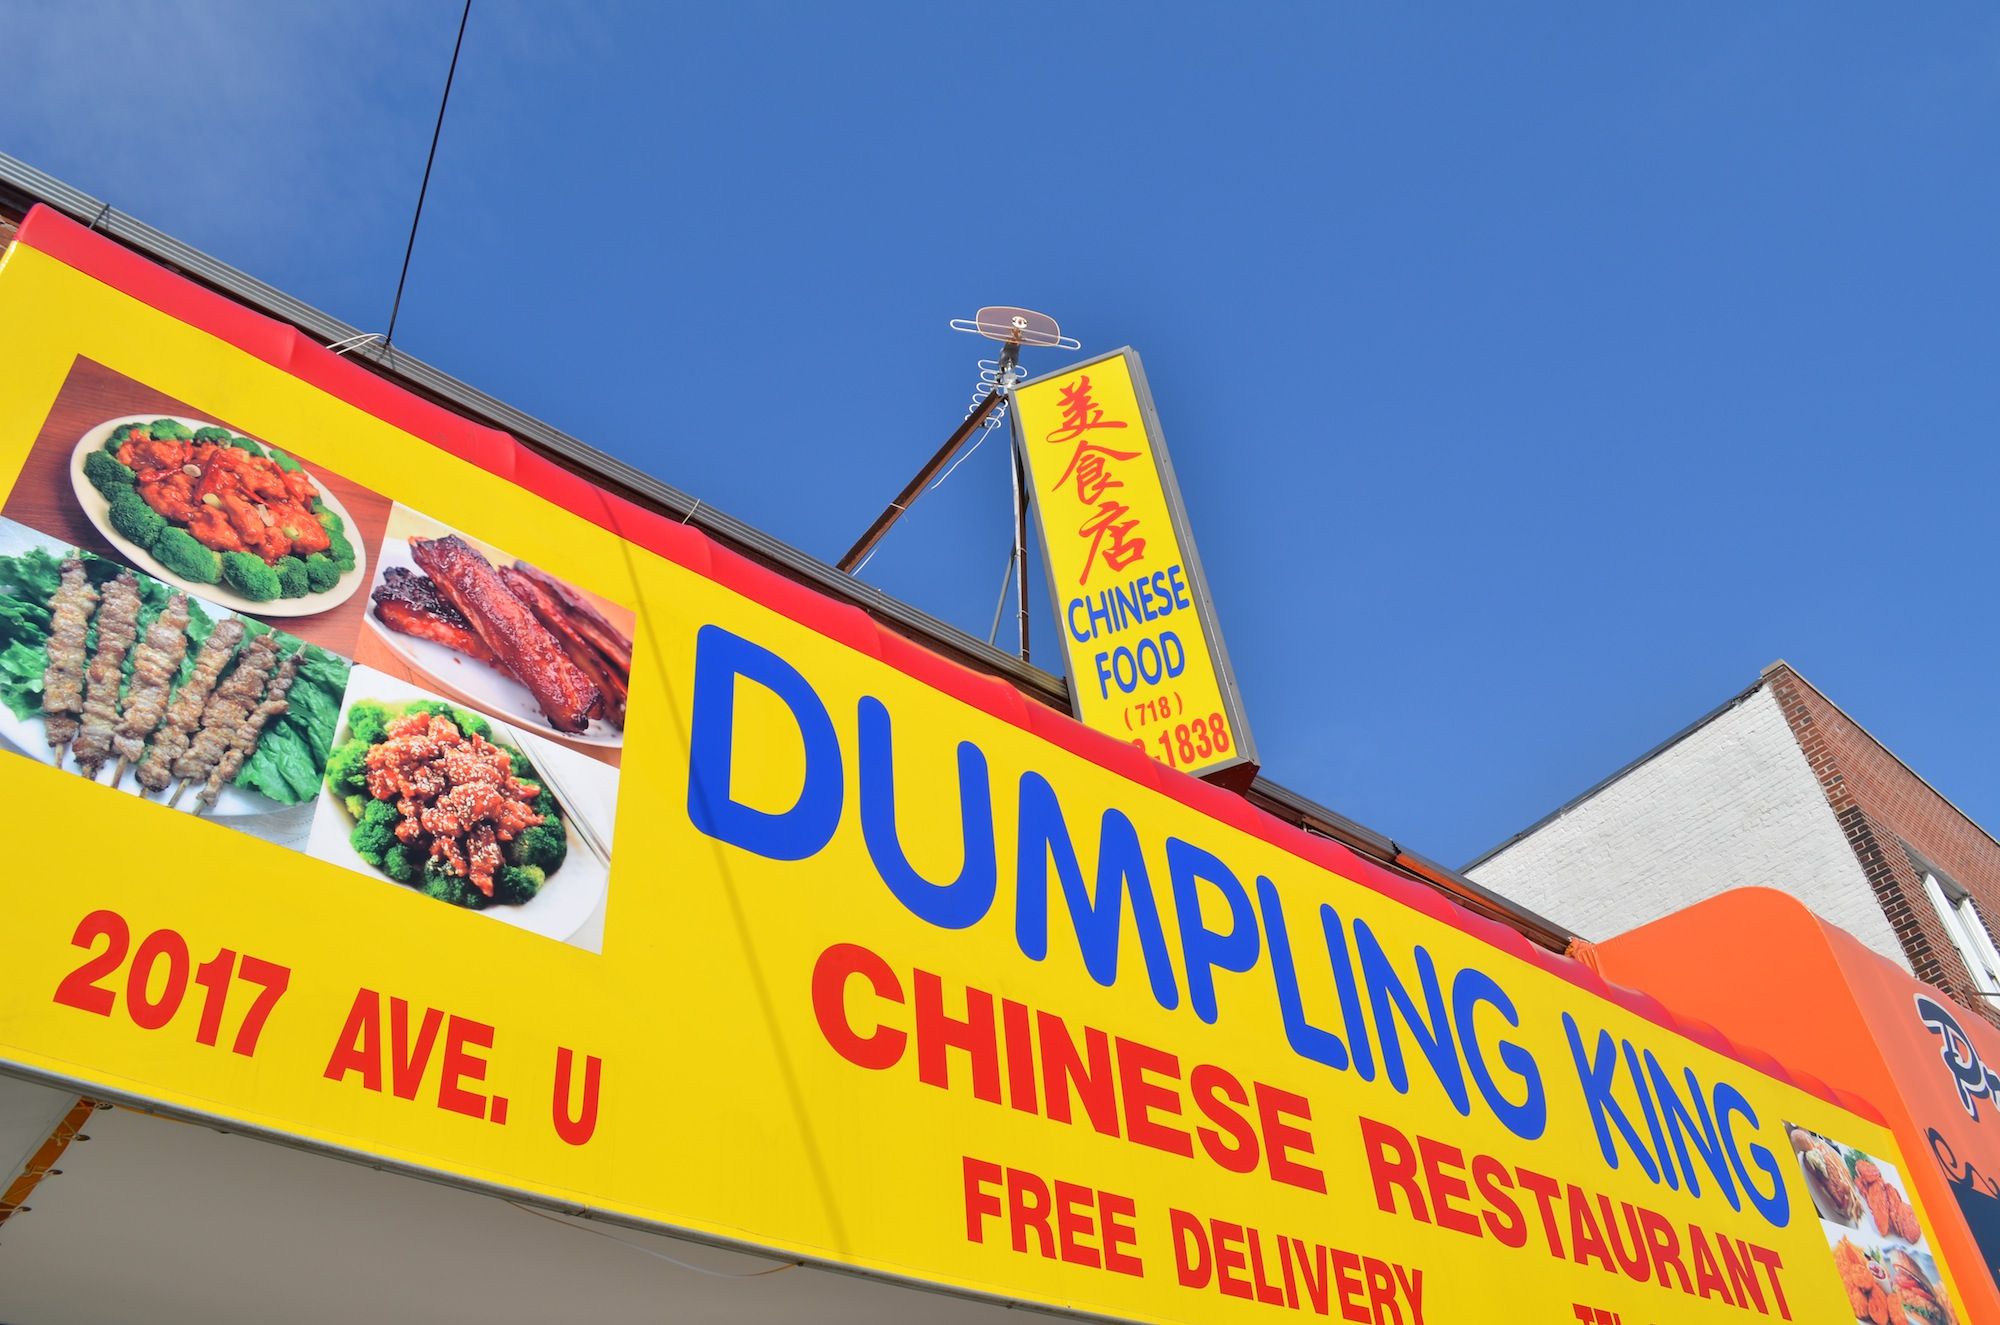 New Chinese Restaurant Replaces Ming’s Place On Avenue U